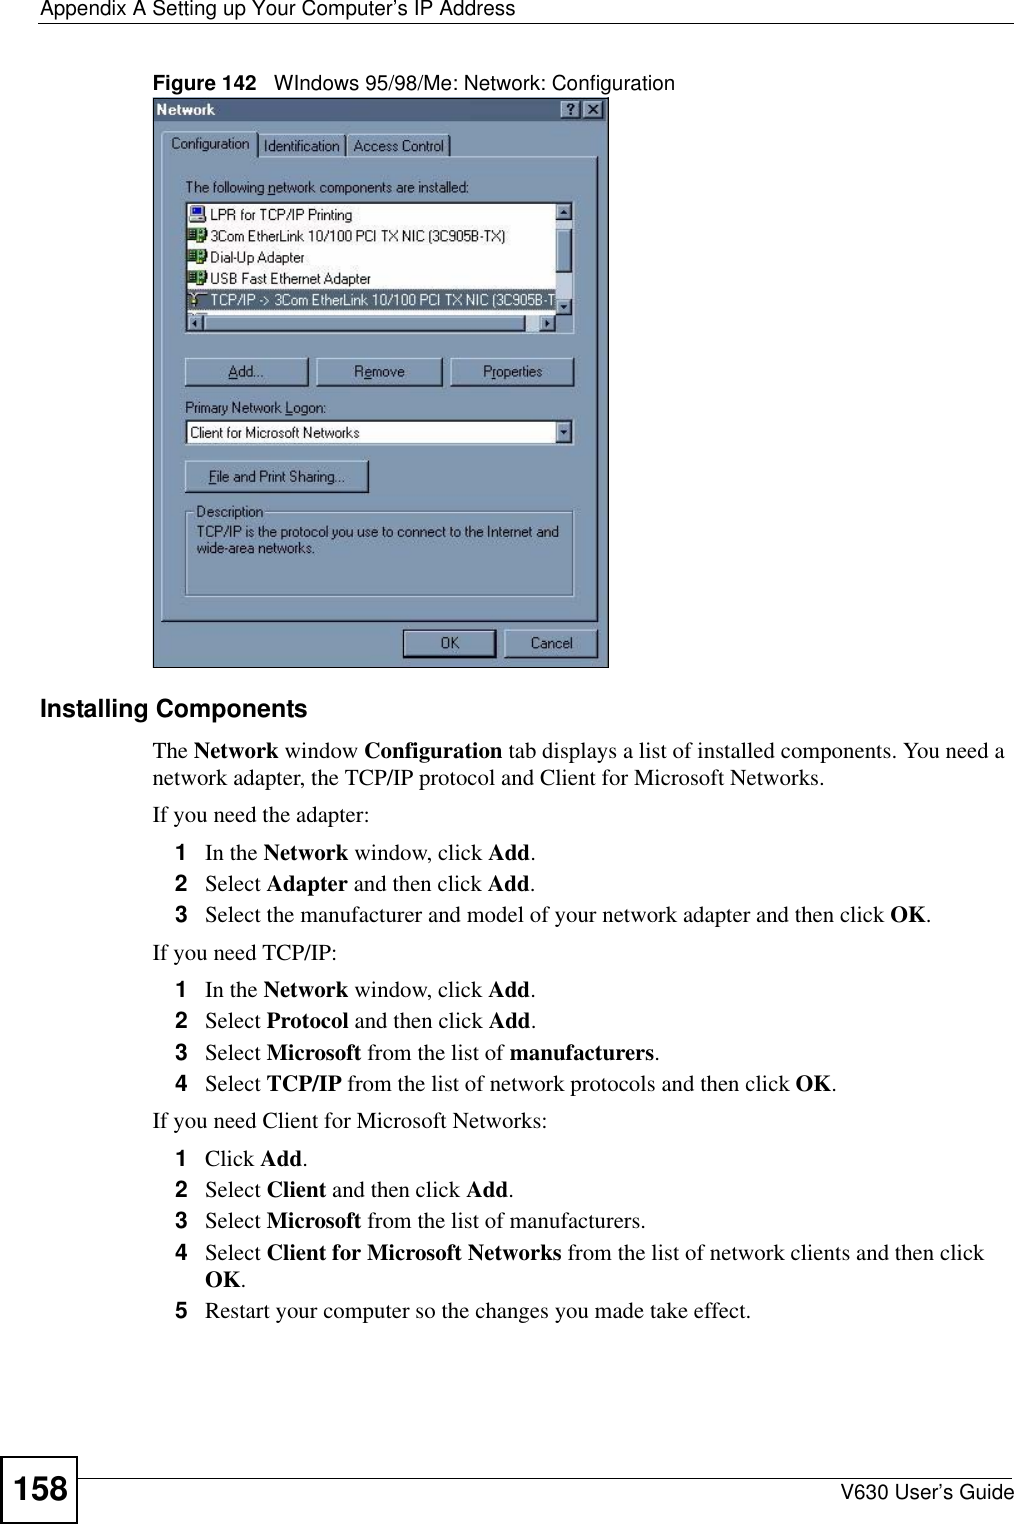 Appendix A Setting up Your Computer’s IP AddressV630 User’s Guide158Figure 142   WIndows 95/98/Me: Network: ConfigurationInstalling ComponentsThe Network window Configuration tab displays a list of installed components. You need a network adapter, the TCP/IP protocol and Client for Microsoft Networks.If you need the adapter:1In the Network window, click Add.2Select Adapter and then click Add.3Select the manufacturer and model of your network adapter and then click OK.If you need TCP/IP:1In the Network window, click Add.2Select Protocol and then click Add.3Select Microsoft from the list of manufacturers.4Select TCP/IP from the list of network protocols and then click OK.If you need Client for Microsoft Networks:1Click Add.2Select Client and then click Add.3Select Microsoft from the list of manufacturers.4Select Client for Microsoft Networks from the list of network clients and then click OK.5Restart your computer so the changes you made take effect.